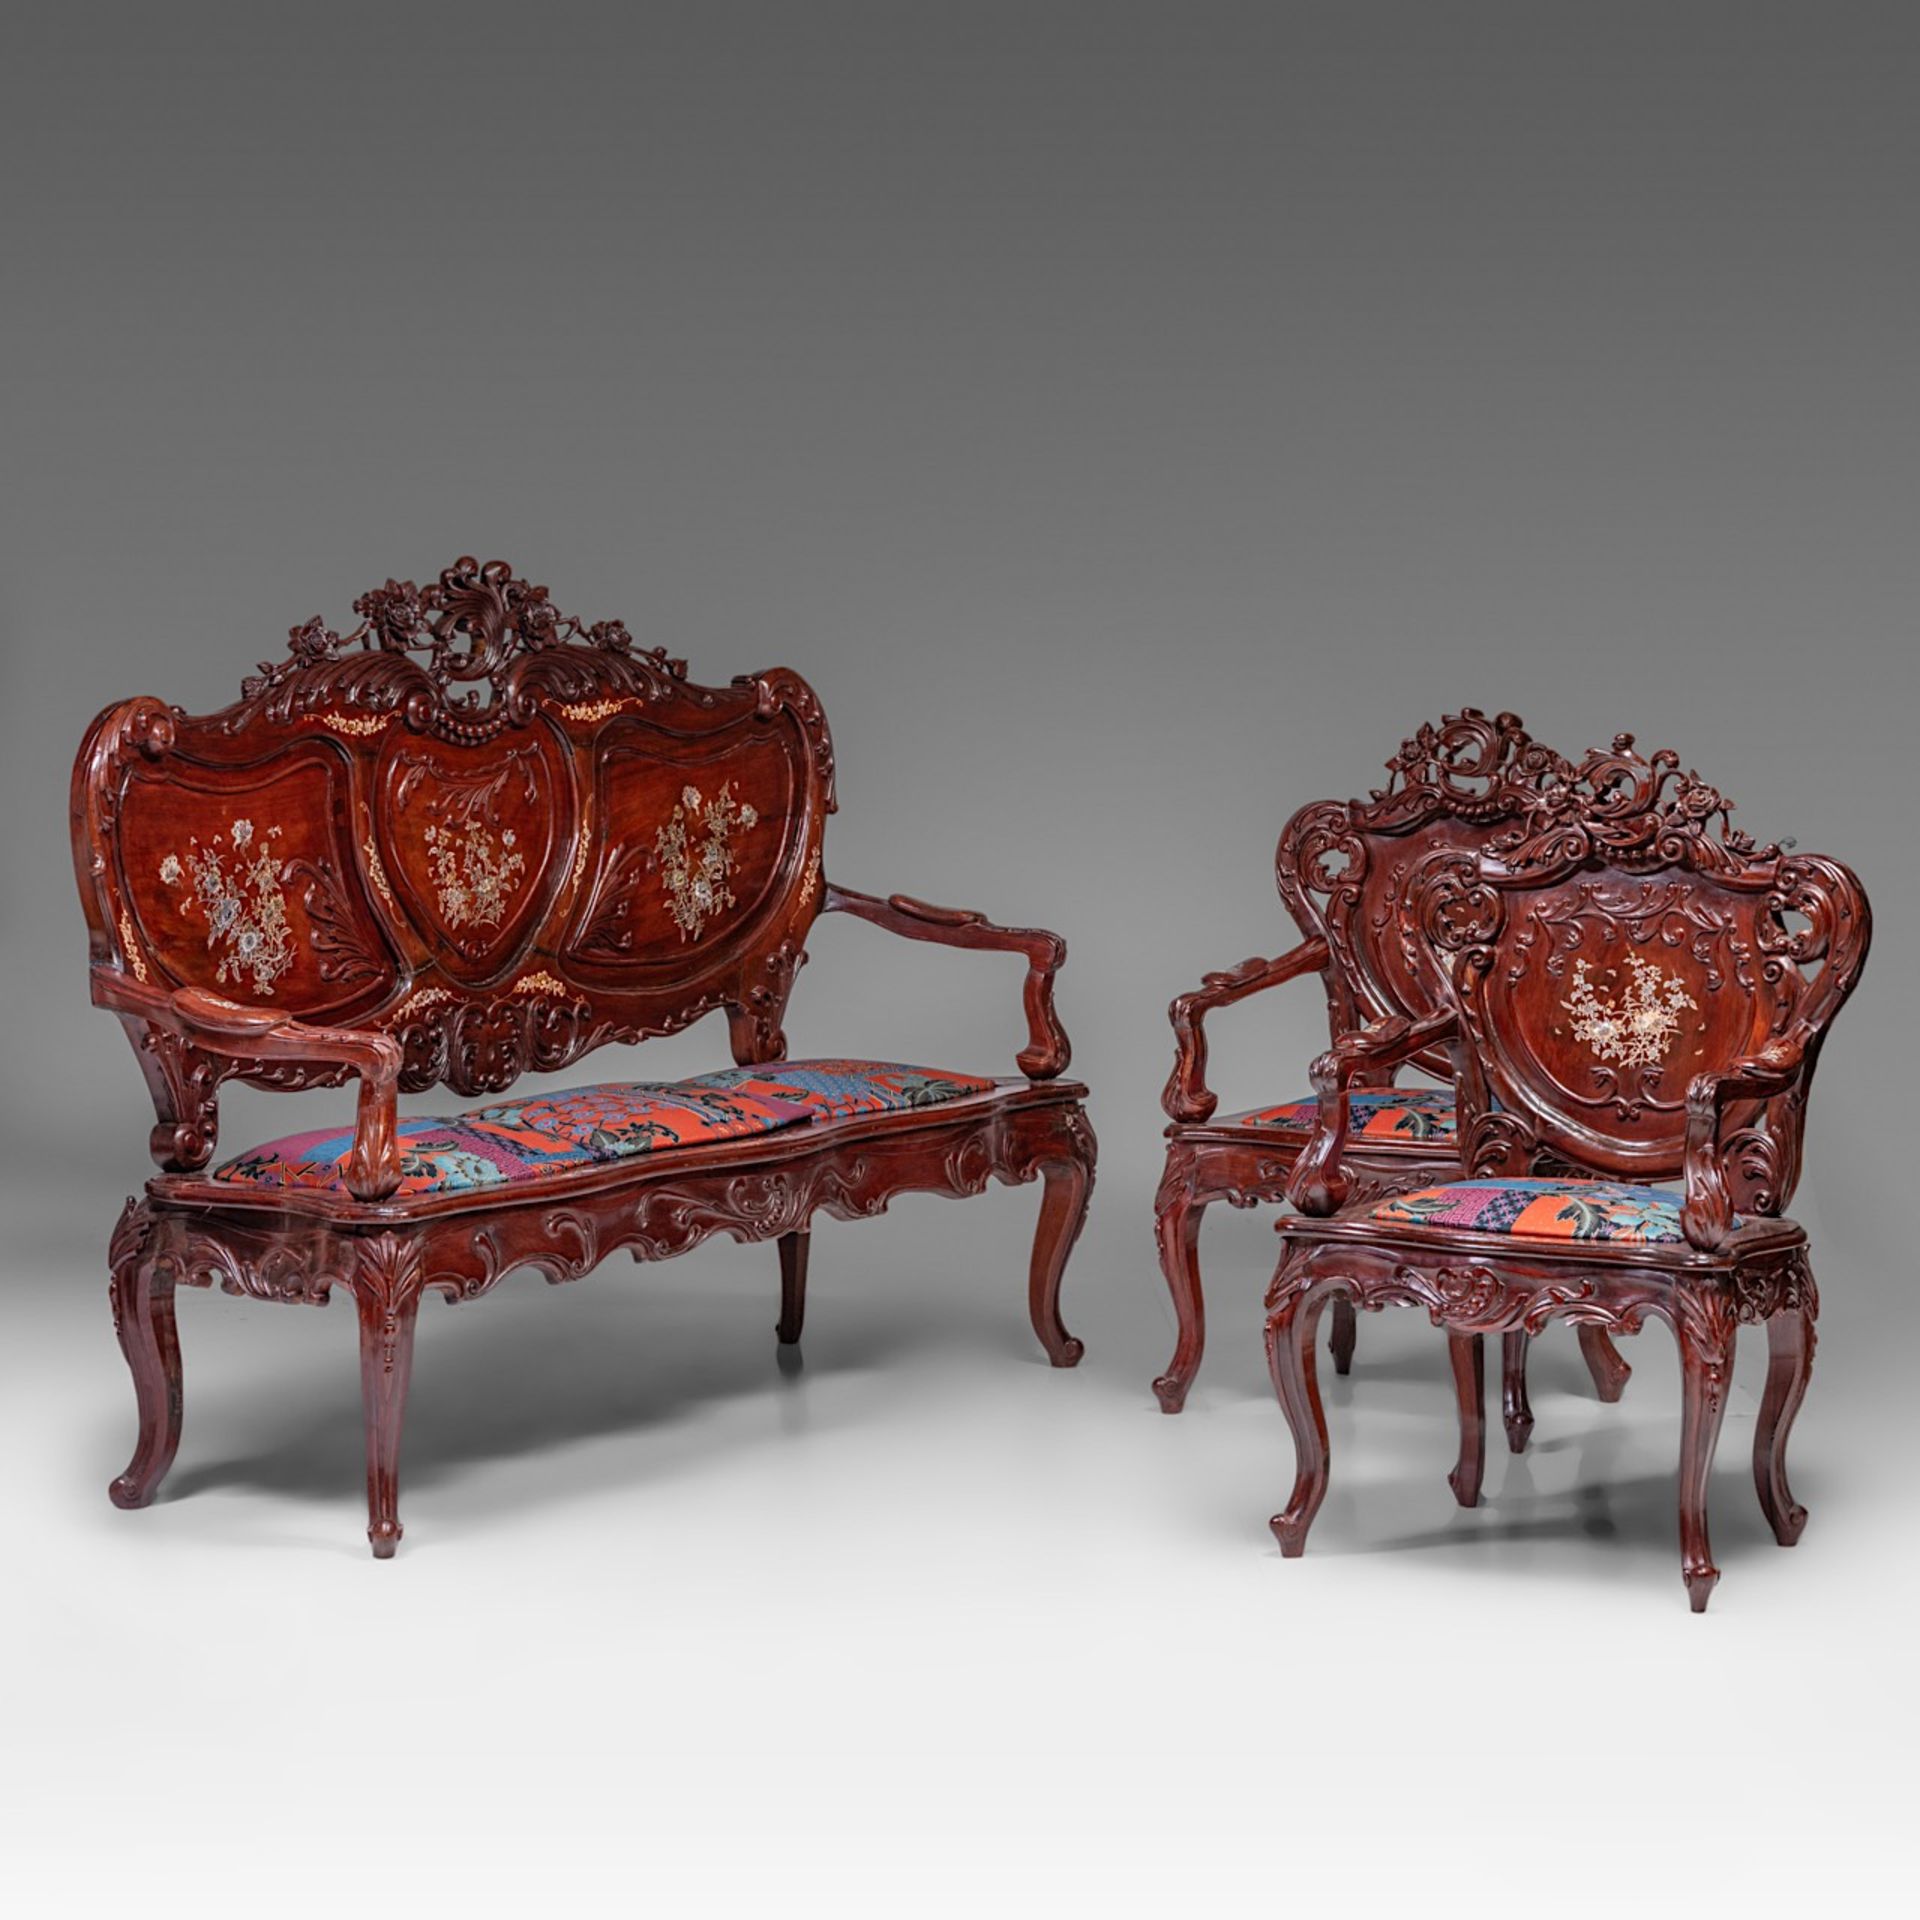 An Anglo-Chinese settee and two chairs, H settee 132 - H chair 108 cm - Image 13 of 24